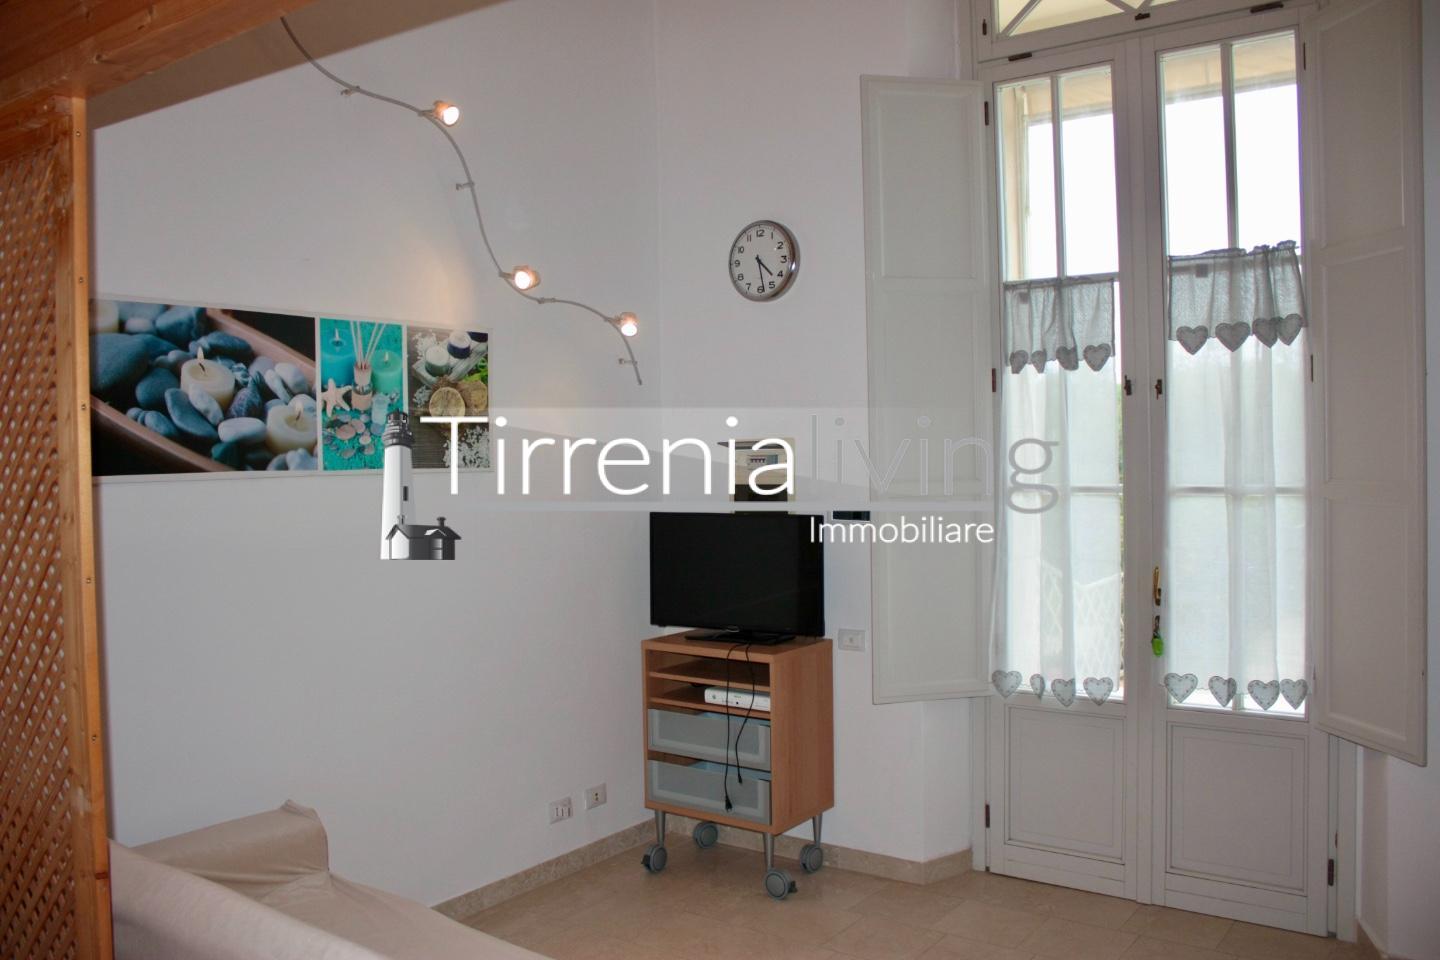 Apartment for holiday rentals in Pisa